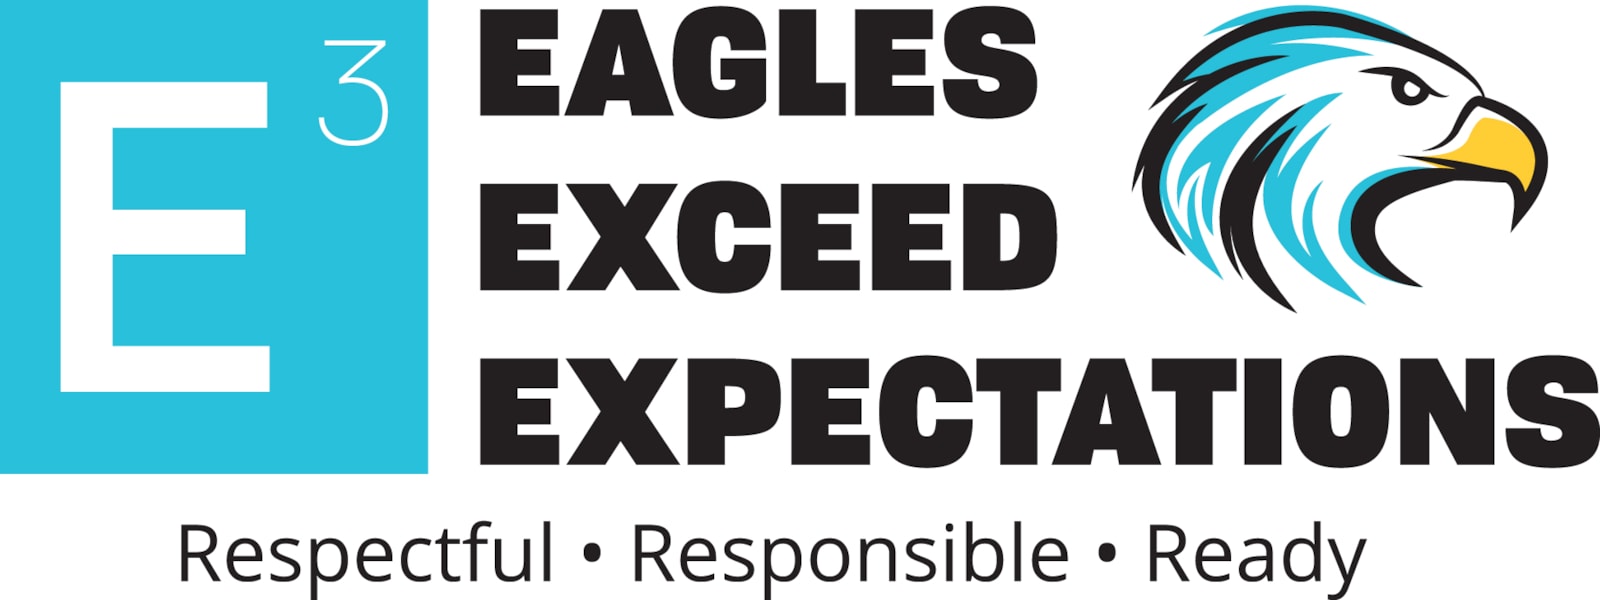 DMS Expectations (respectful, responsible, ready)